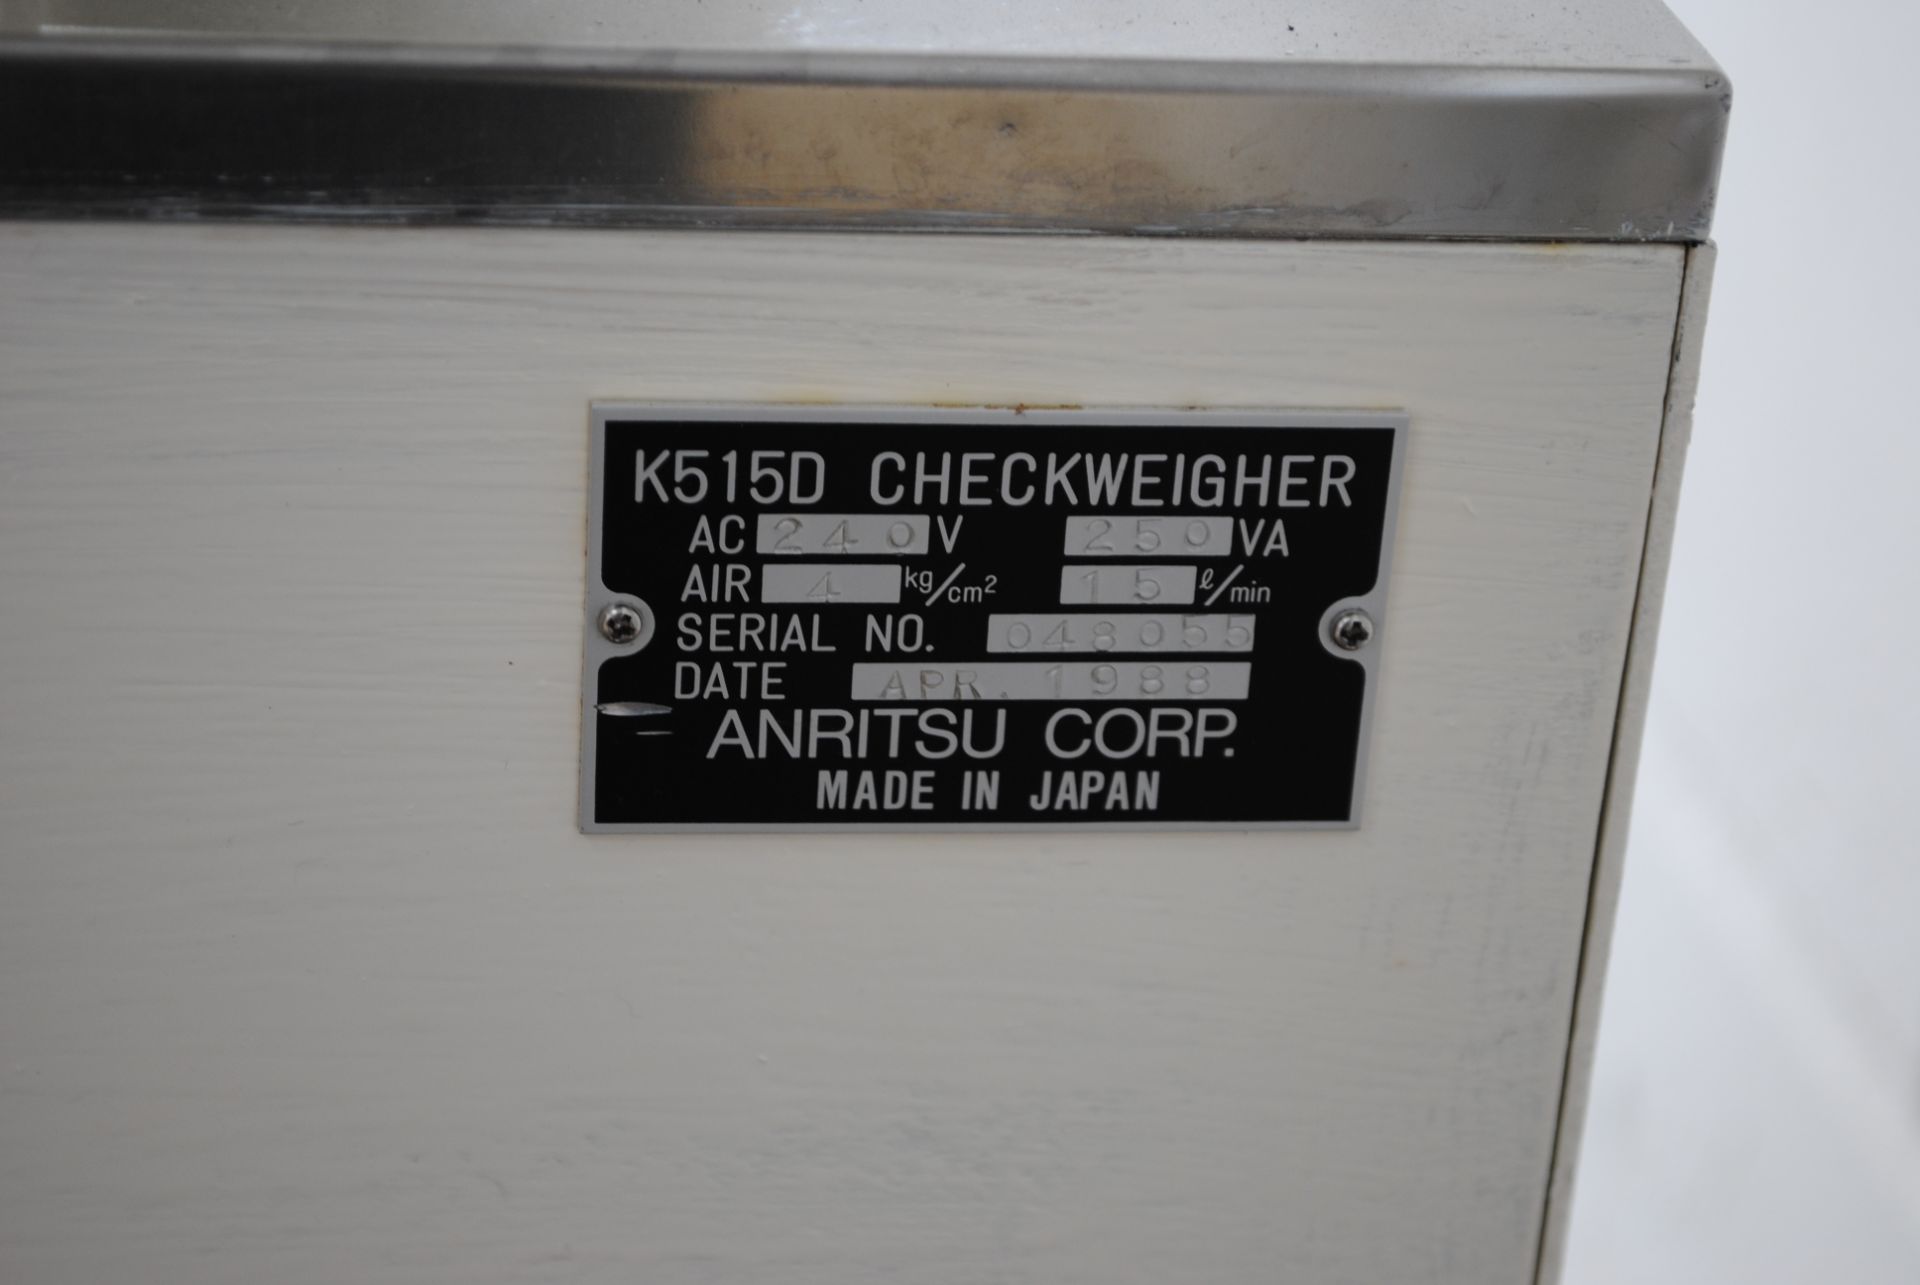 Aniritsu Capsule / Tablet Checkweigher Model: K51 5D with K261d Data Recorder S/N:A306 Year: 21/2/ - Image 7 of 8